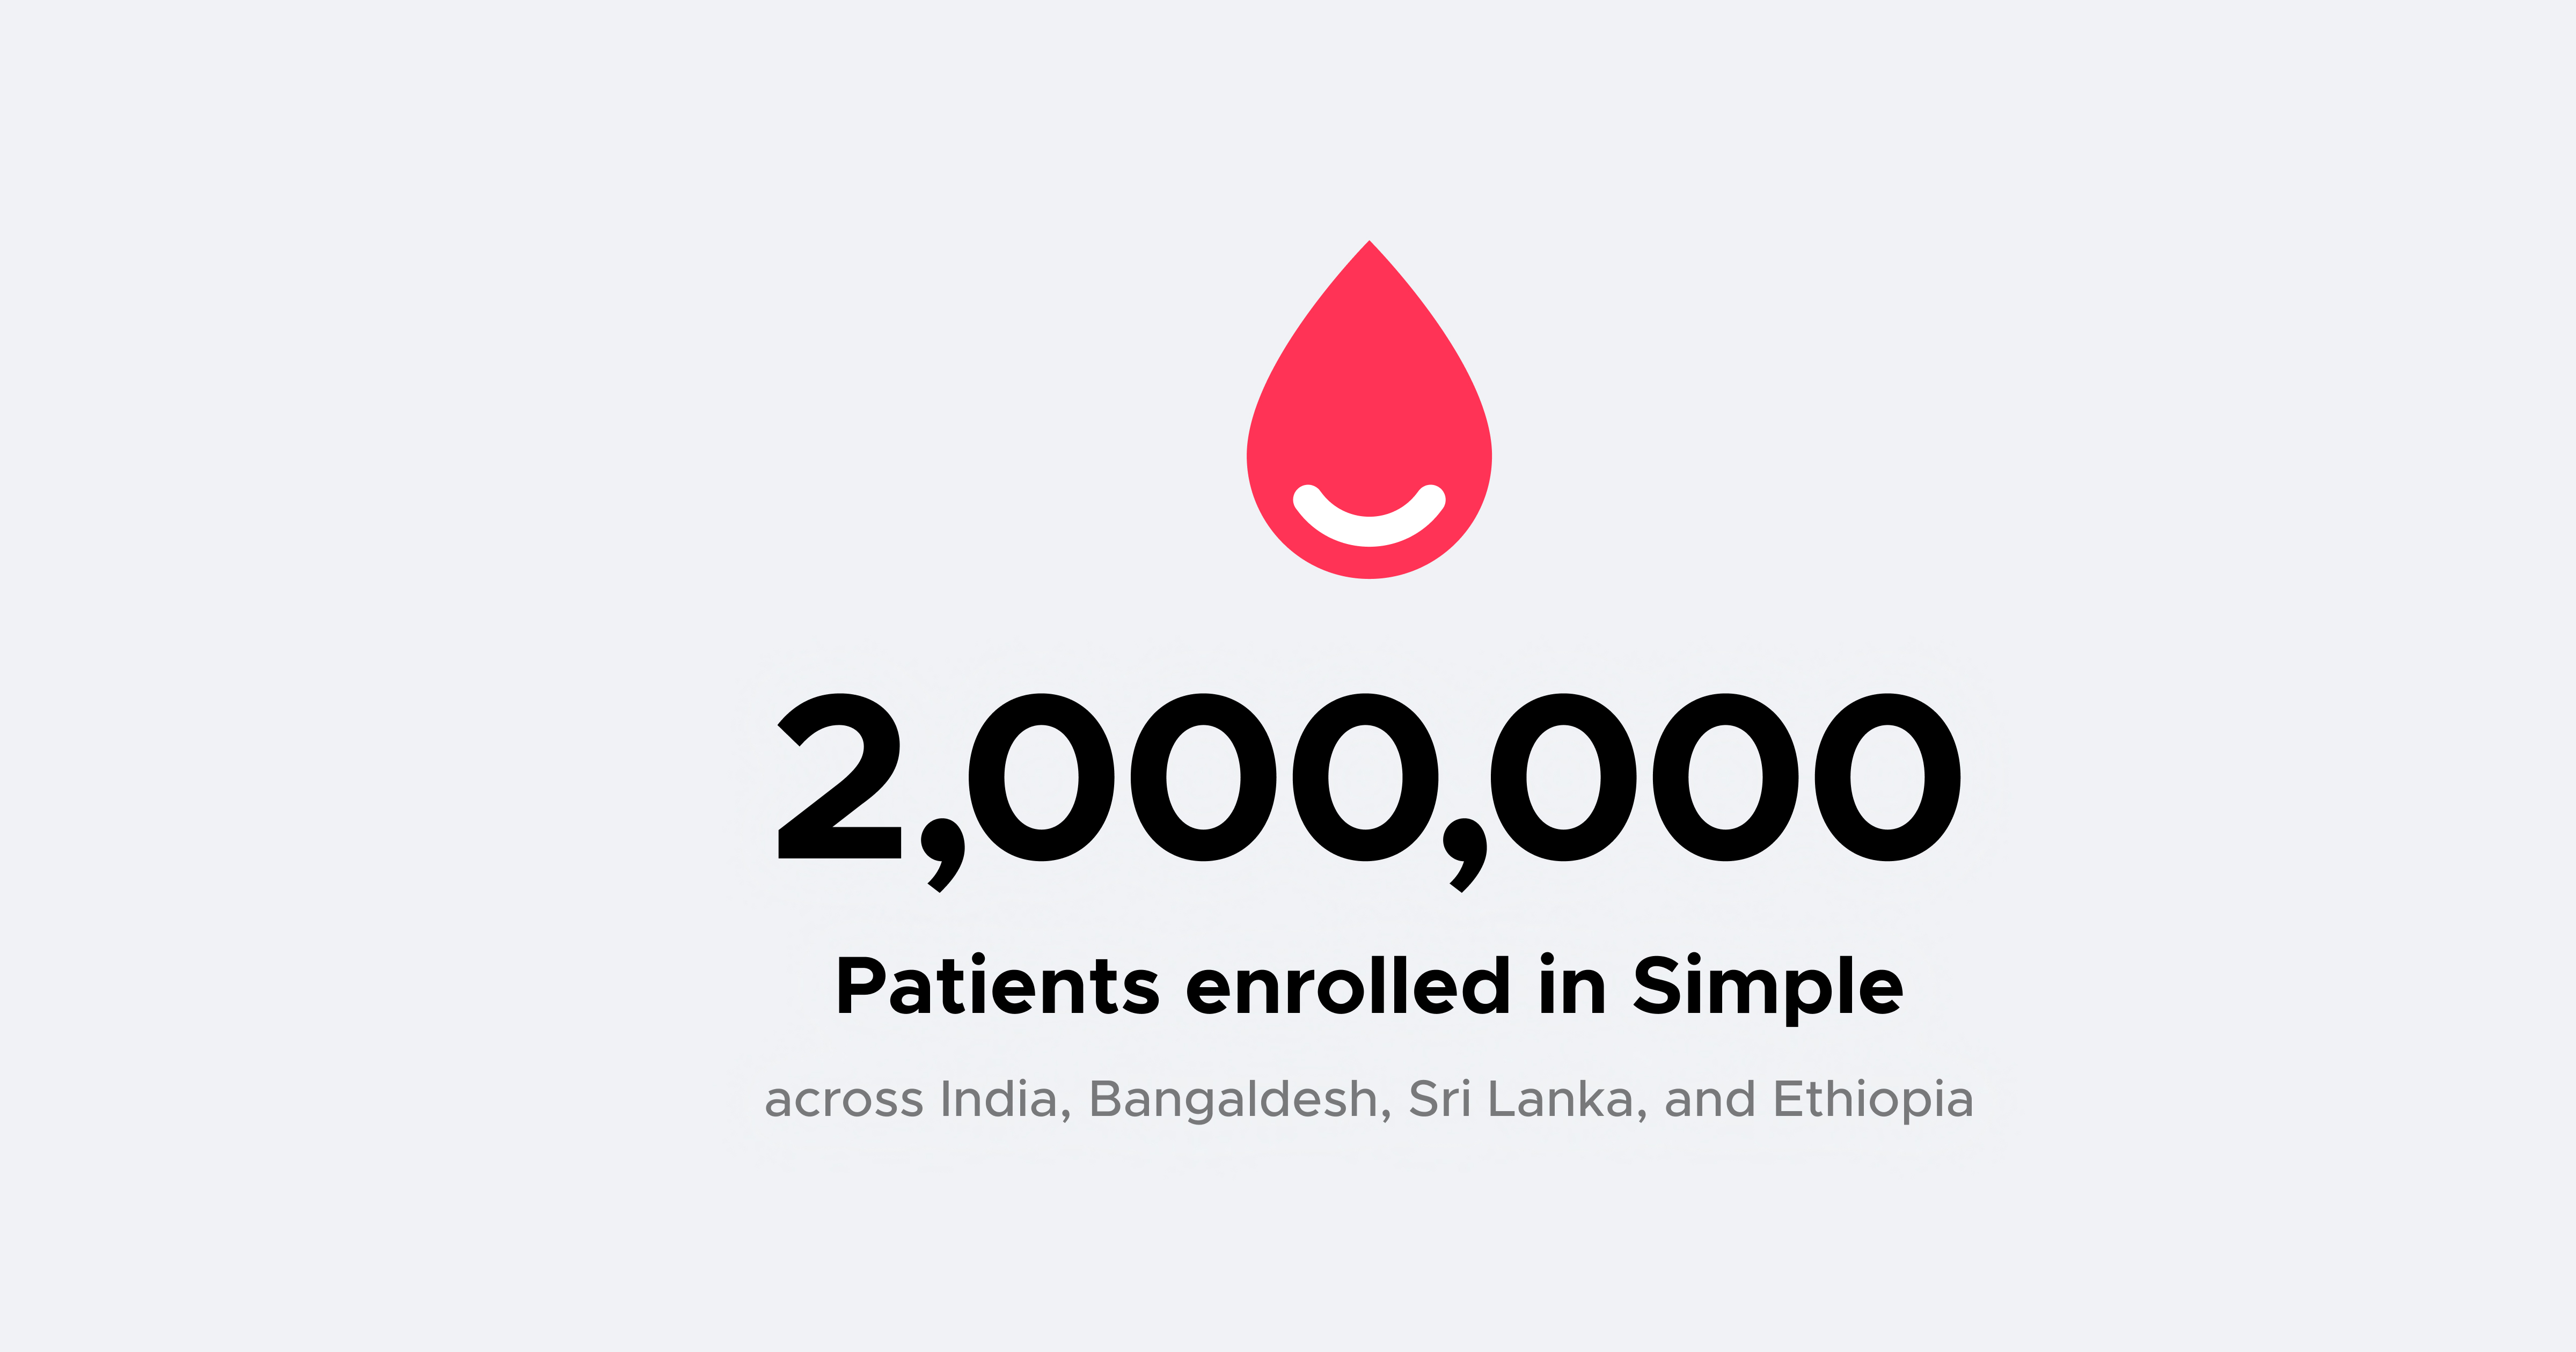 Simple now has two million patients enrolled